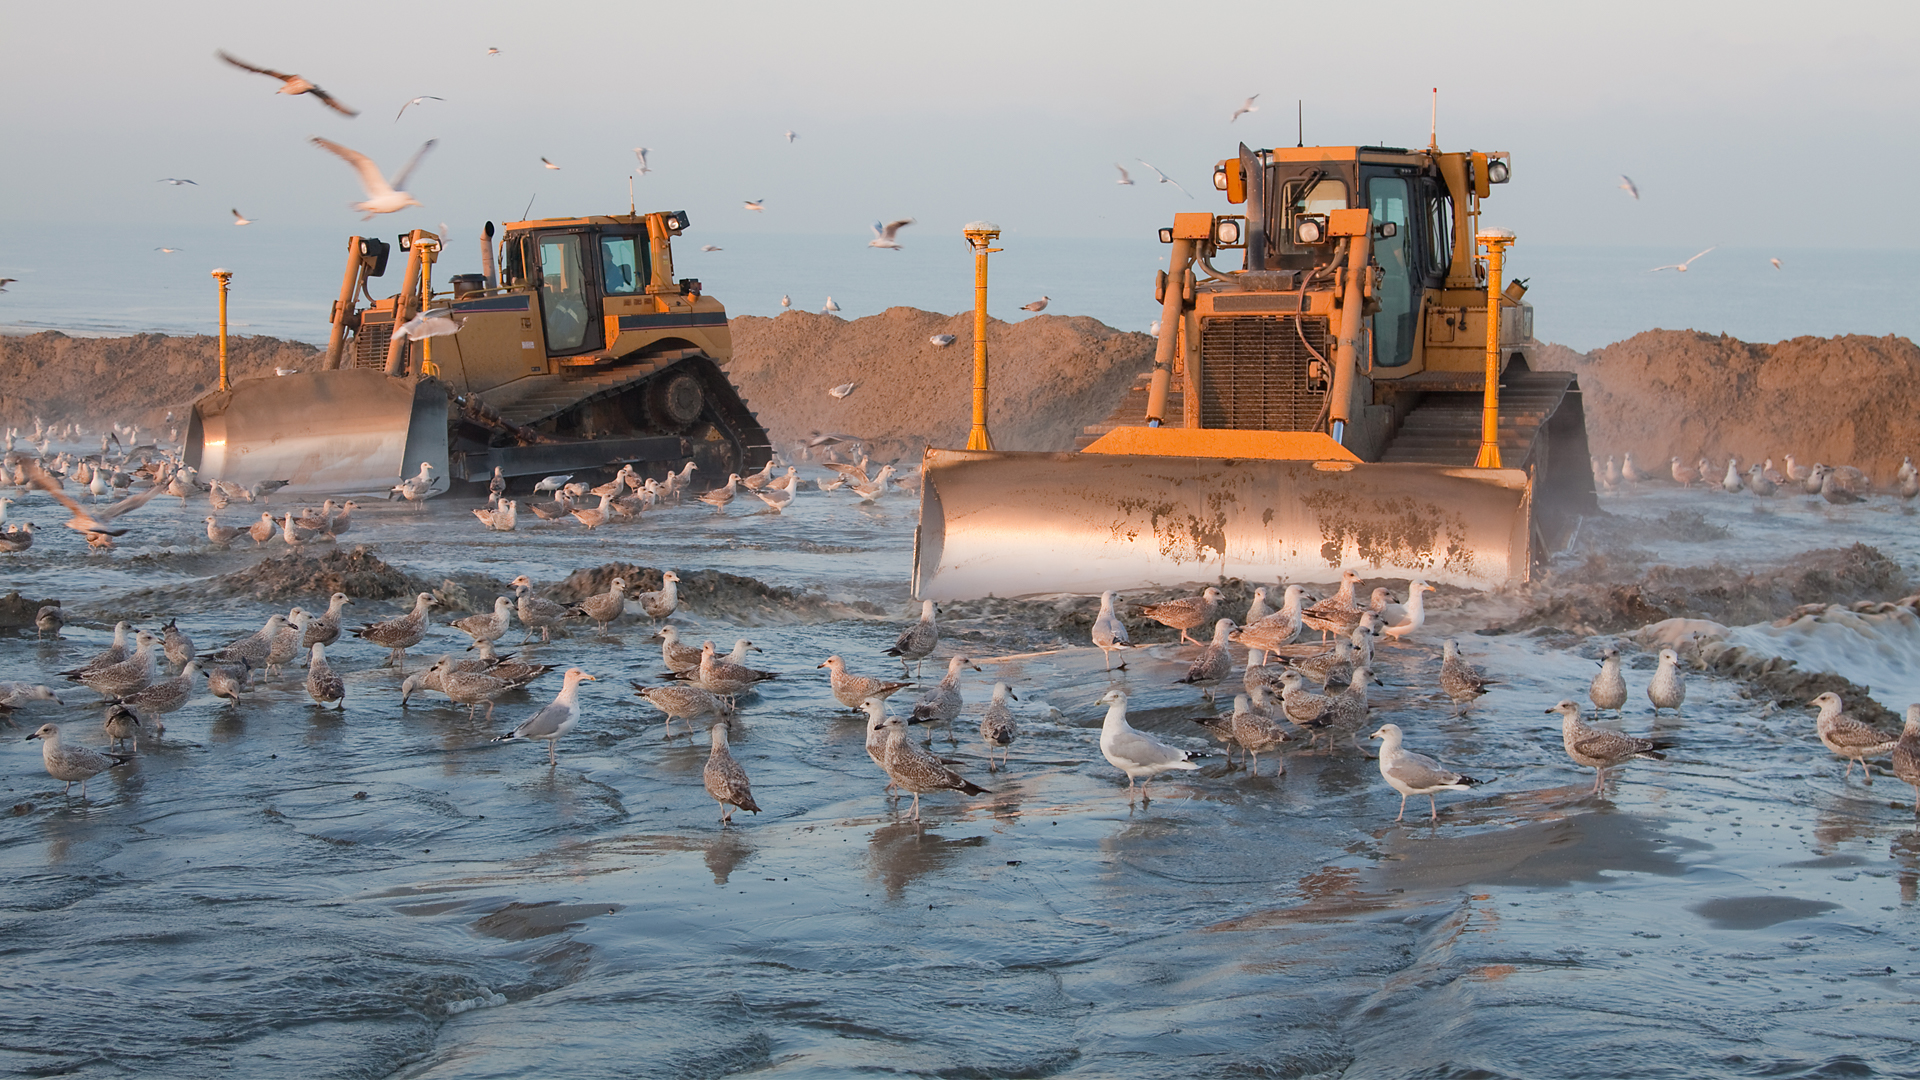 Two Bulldozers dredging a beach in holland surrounded by seagulls